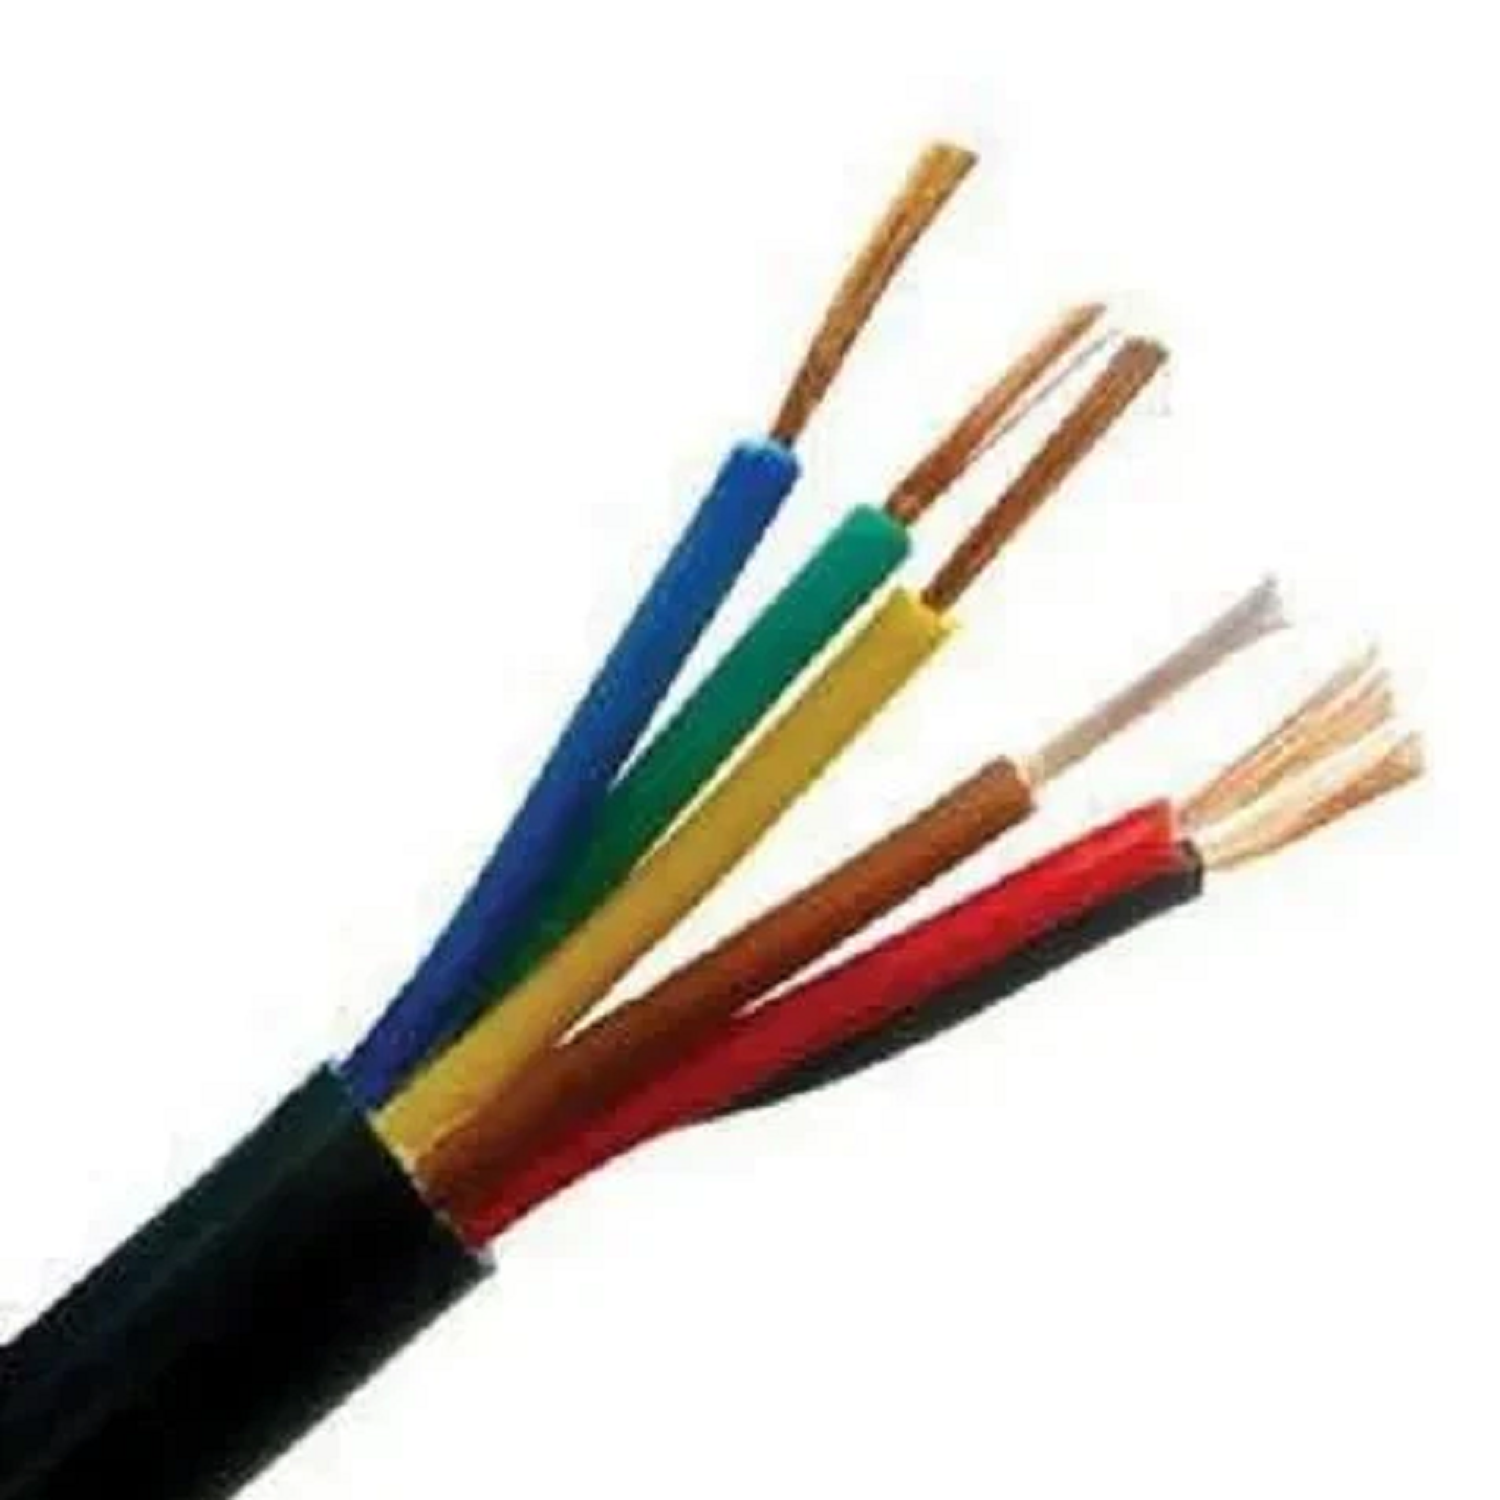 16 Sqmm Finolex Copper Flexible Cable With PVC Insulated For Domestic 38 Industrial Uses